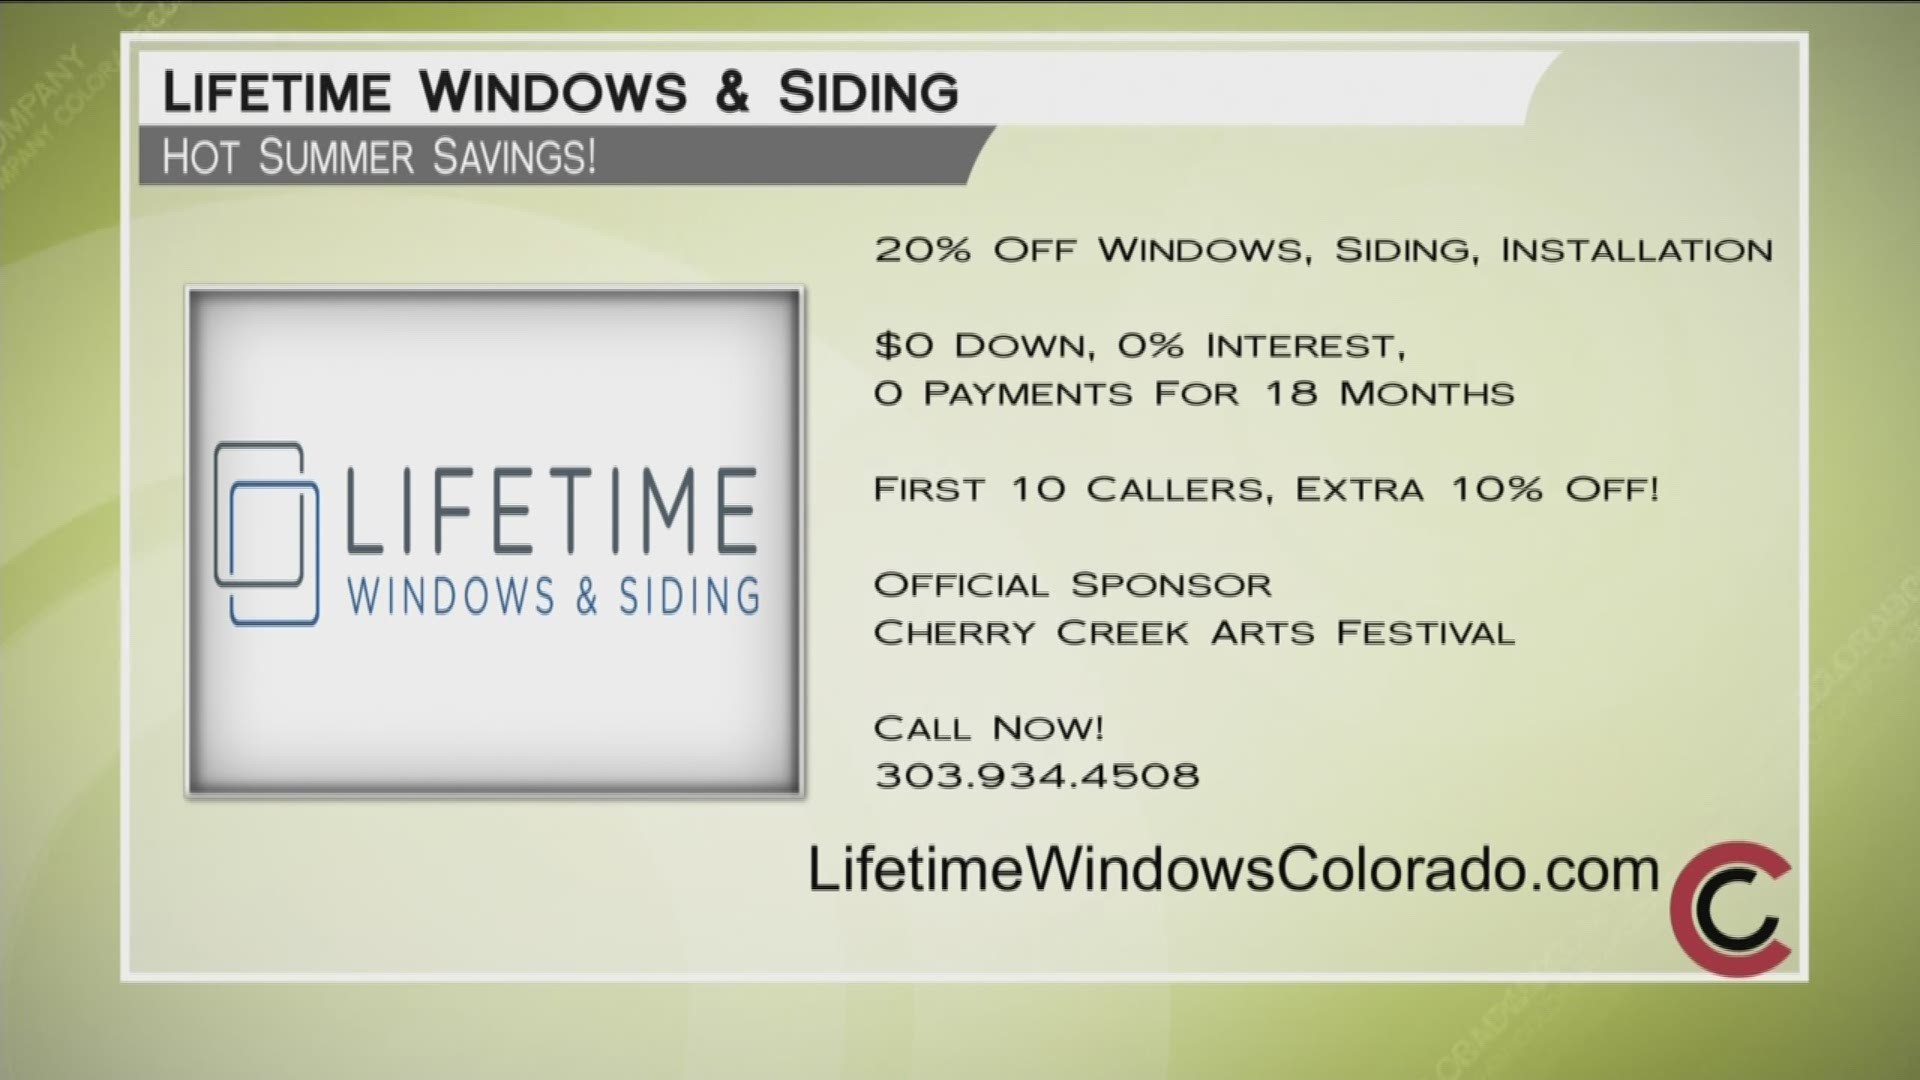 Call 800.GET.WINDOWS or 303.934.4508 and save 20% on windows, siding and installation with Lifetime Windows and Siding. Zero down, zero interest and zero payments for 18 months. Learn more at www.LifetimeWindowsColorado.com. 
THIS INTERVIEW HAS COMMERCIAL CONTENT. PRODUCTS AND SERVICES FEATURED APPEAR AS PAID ADVERTISING.